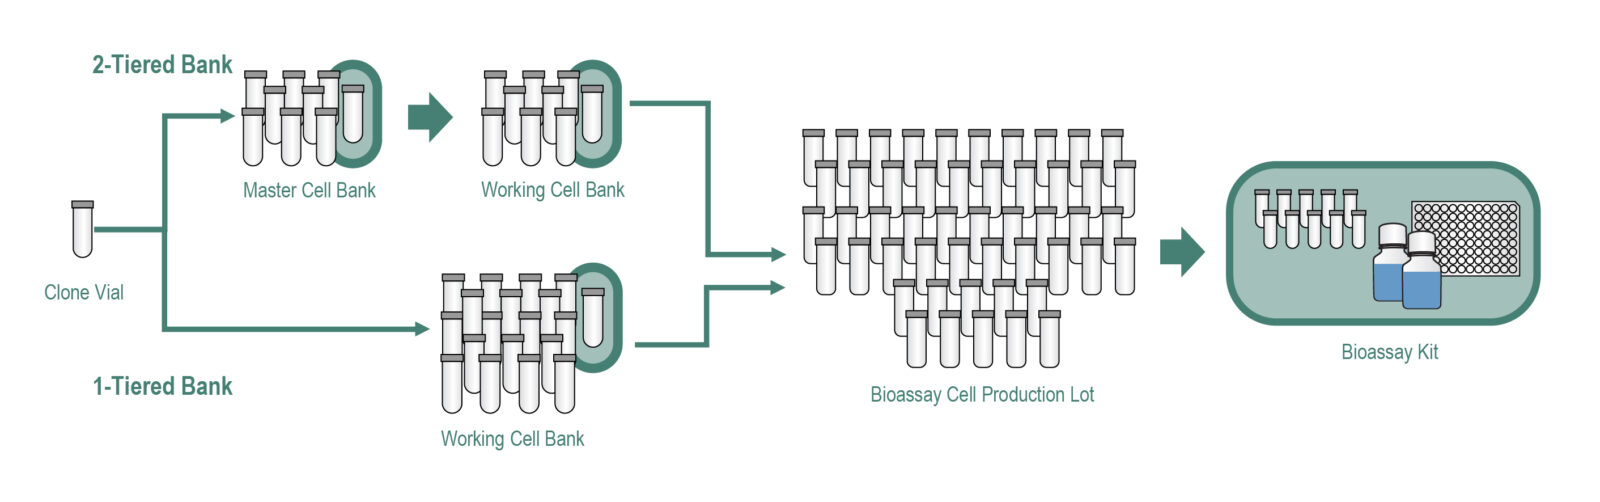 Analytical Cell Banks for Bioassay Production Workflow